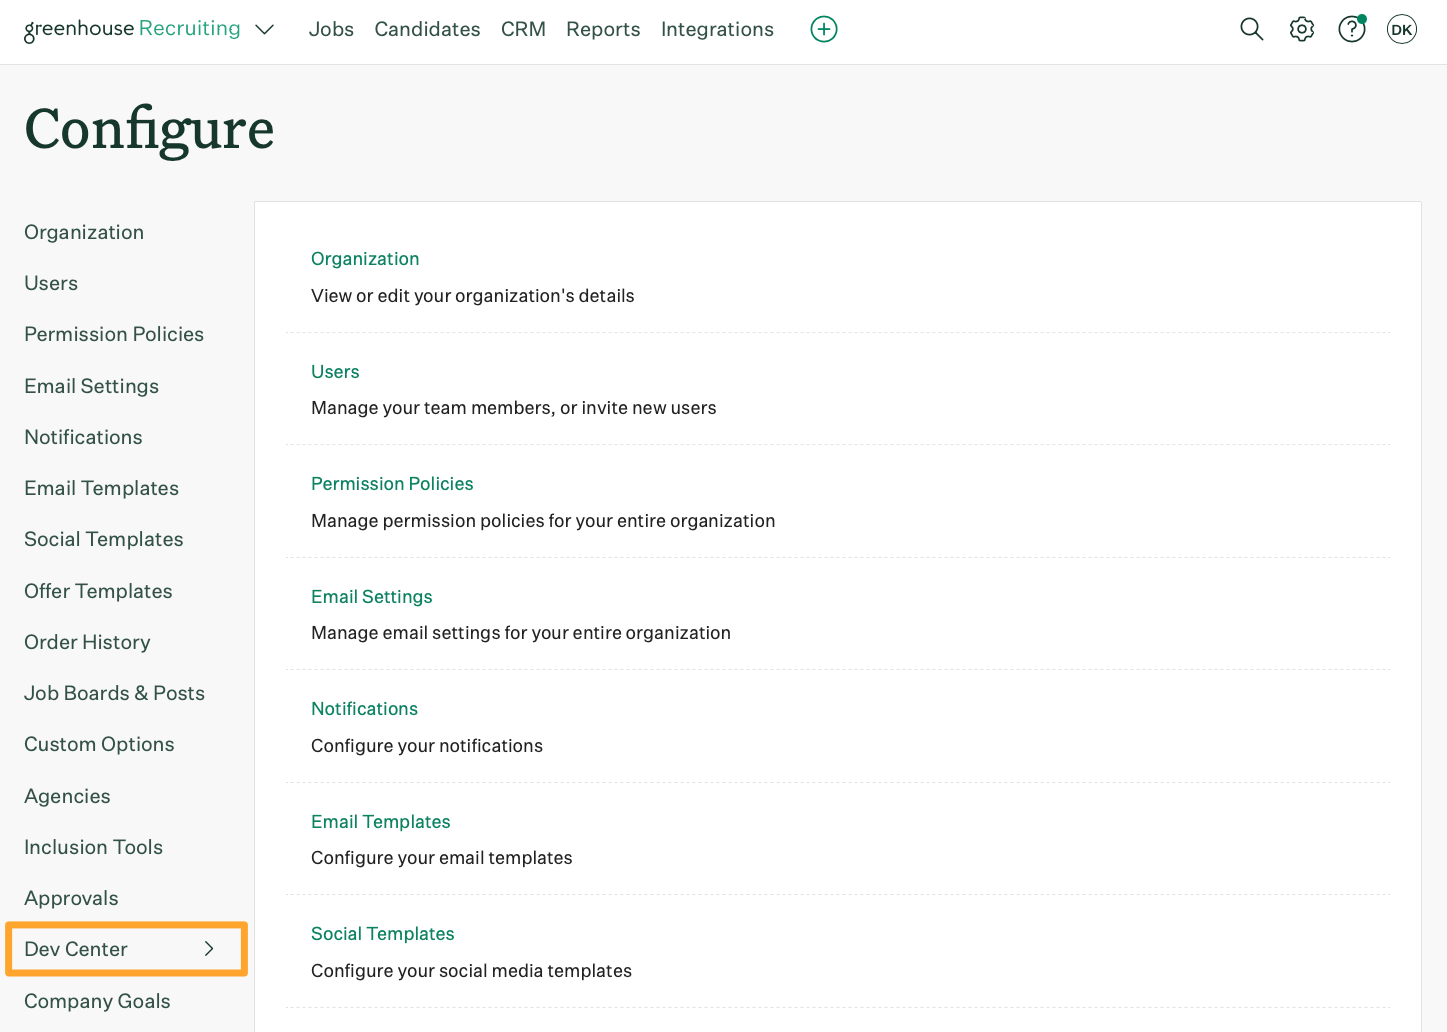 The Configure page shows the Dev Center button highlighted in marigold on the left